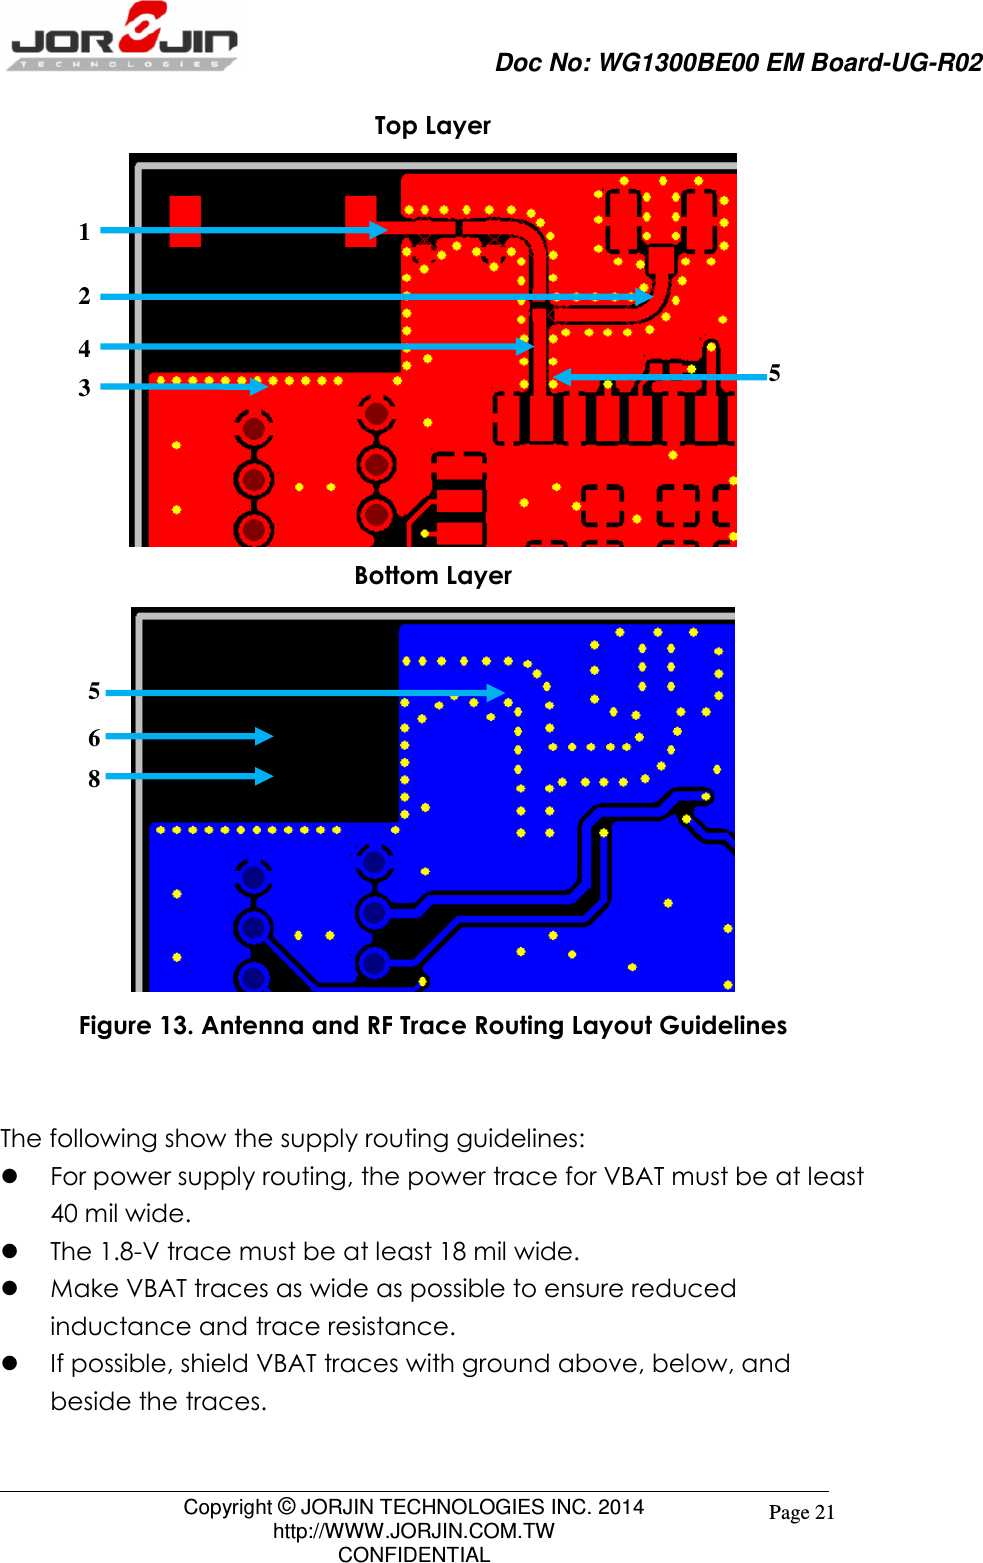                     Doc No: WG1300BE00 EM Board-UG-R02                                                                                        Copyright © JORJIN TECHNOLOGIES INC. 2014 http://WWW.JORJIN.COM.TW CONFIDENTIAL Page 21 Top Layer  Bottom Layer  Figure 13. Antenna and RF Trace Routing Layout Guidelines   The following show the supply routing guidelines:  For power supply routing, the power trace for VBAT must be at least 40 mil wide.  The 1.8-V trace must be at least 18 mil wide.  Make VBAT traces as wide as possible to ensure reduced inductance and trace resistance.  If possible, shield VBAT traces with ground above, below, and beside the traces.  1 2 3 4 5 5 6 8 